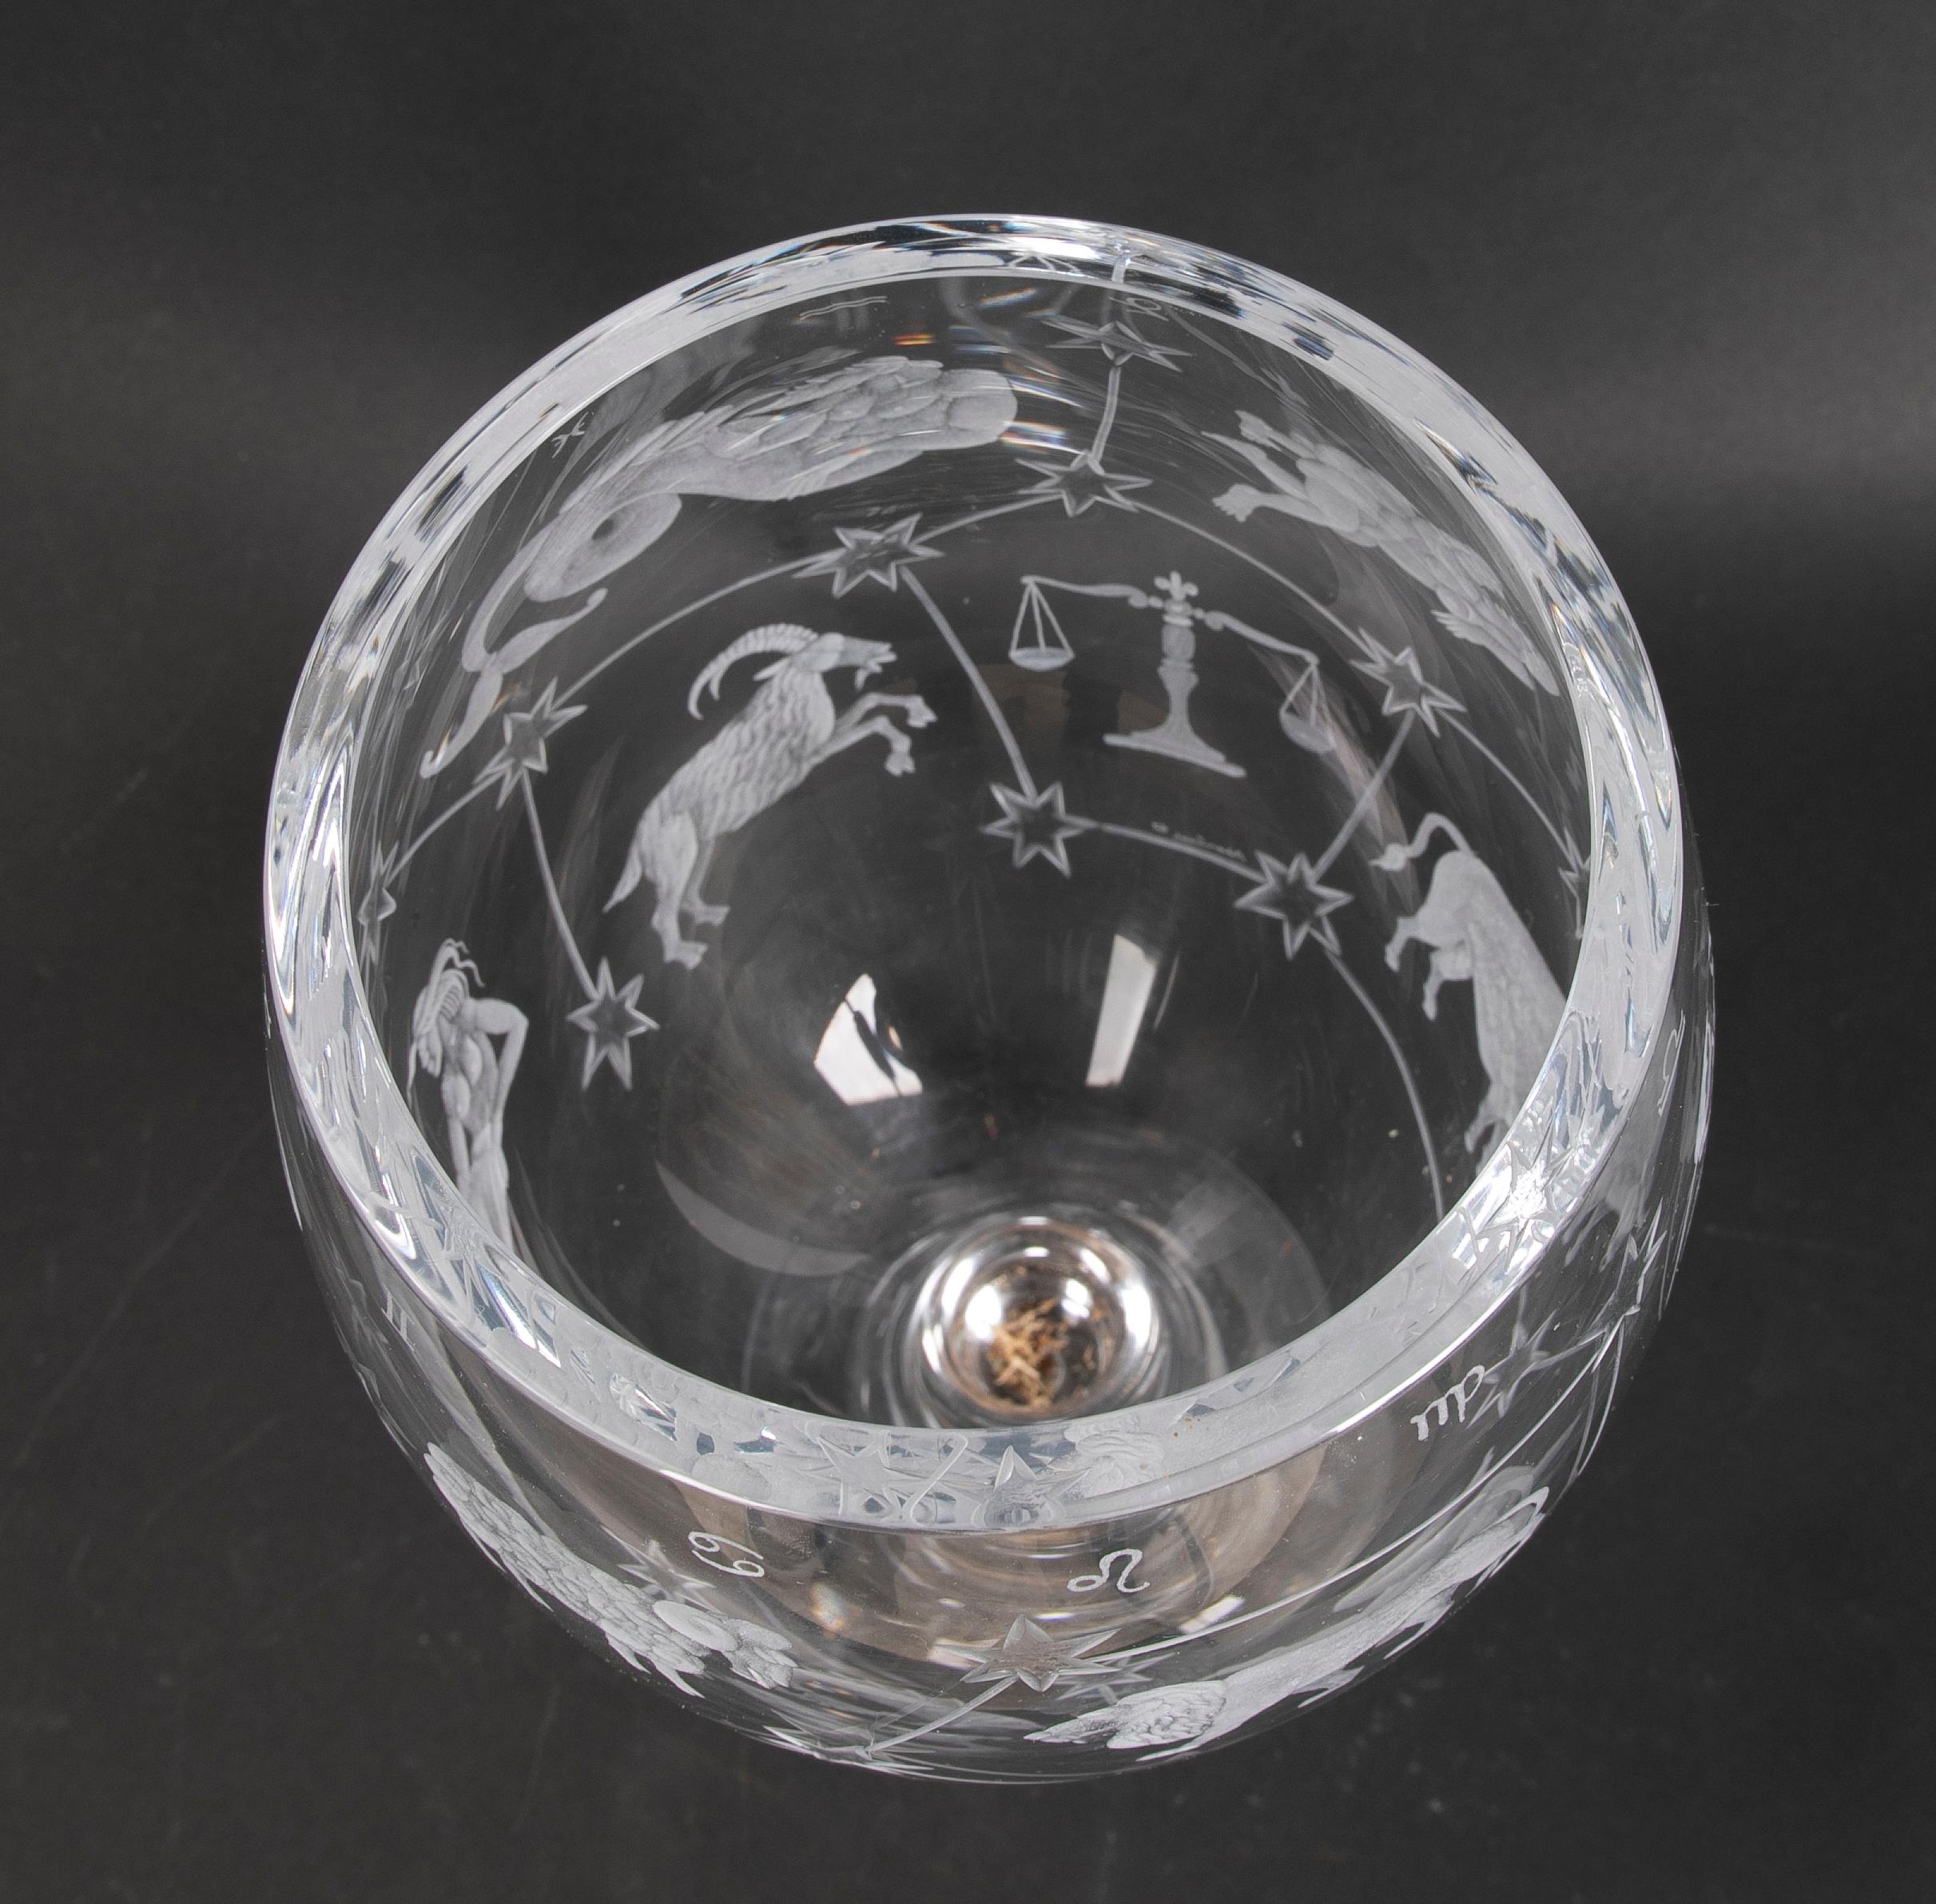 Hand-Cut Crystal Vase from the House of Mottl with Horoscope Scenes For Sale 2